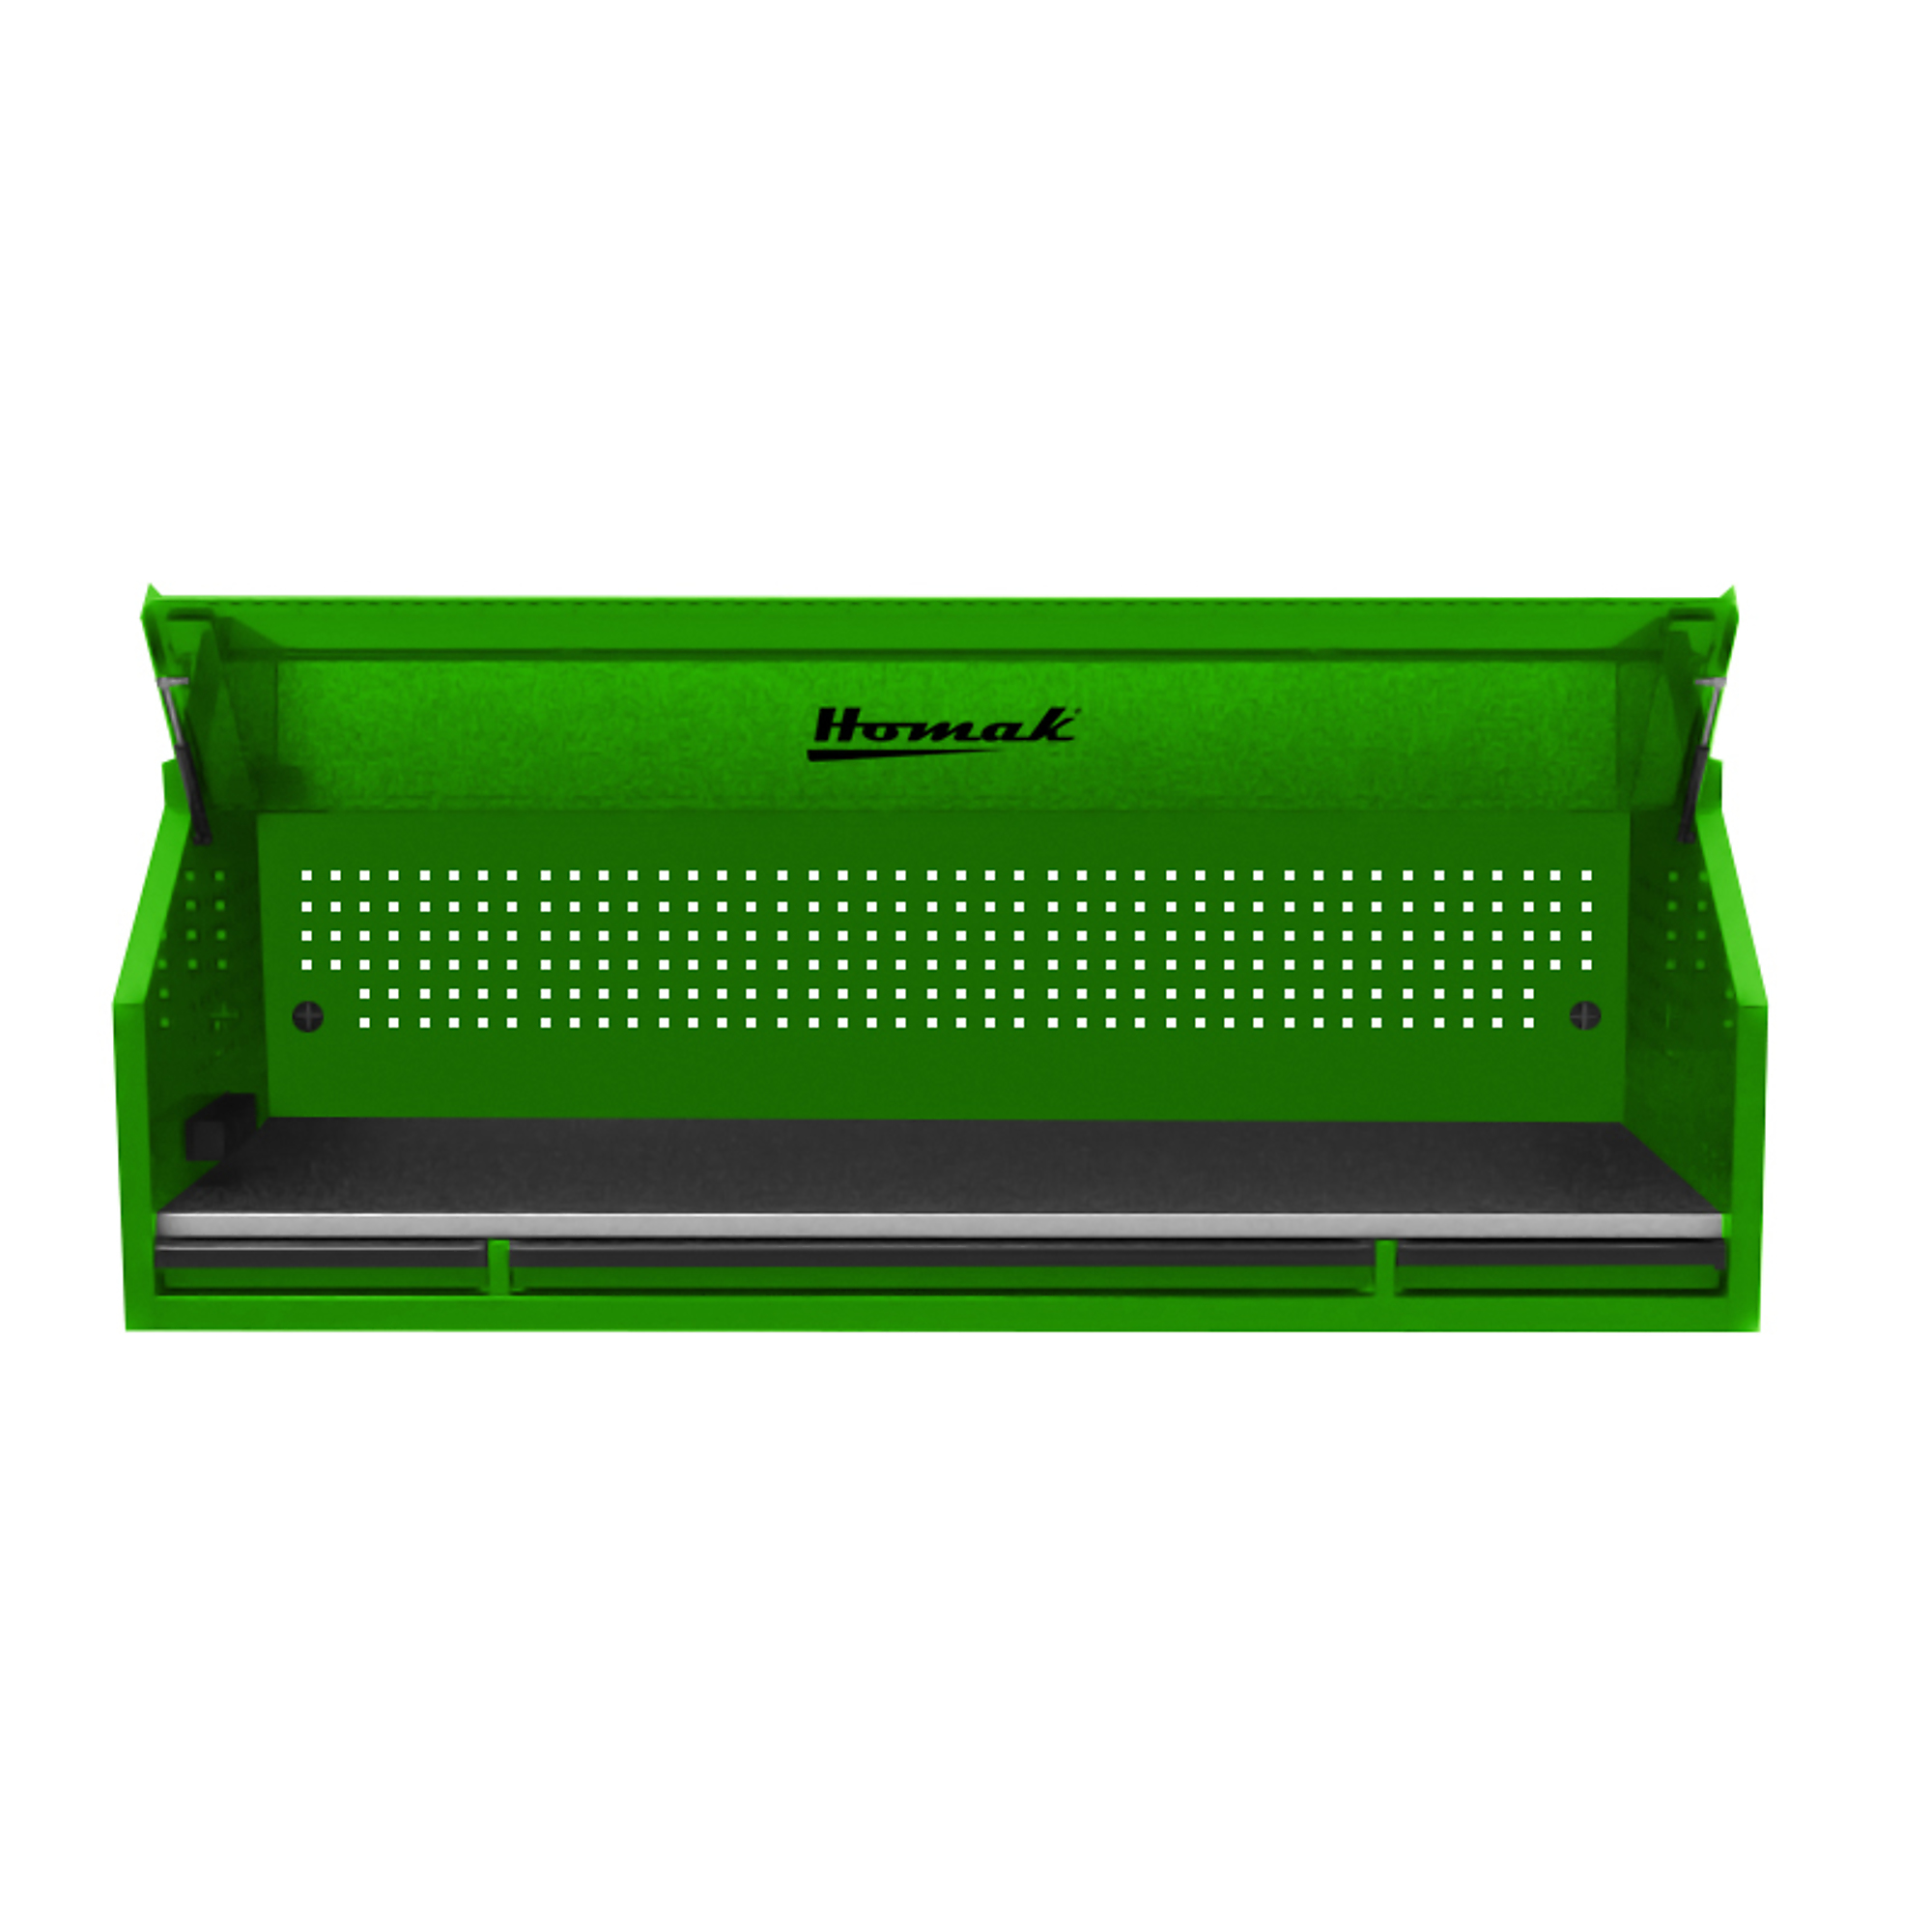 Homak RS Pro, 72Inch RS PRO TOP HUTCH-LIME GREEN, Width 71.5 in, Height 24.375 in, Color Green, Model LG02072010